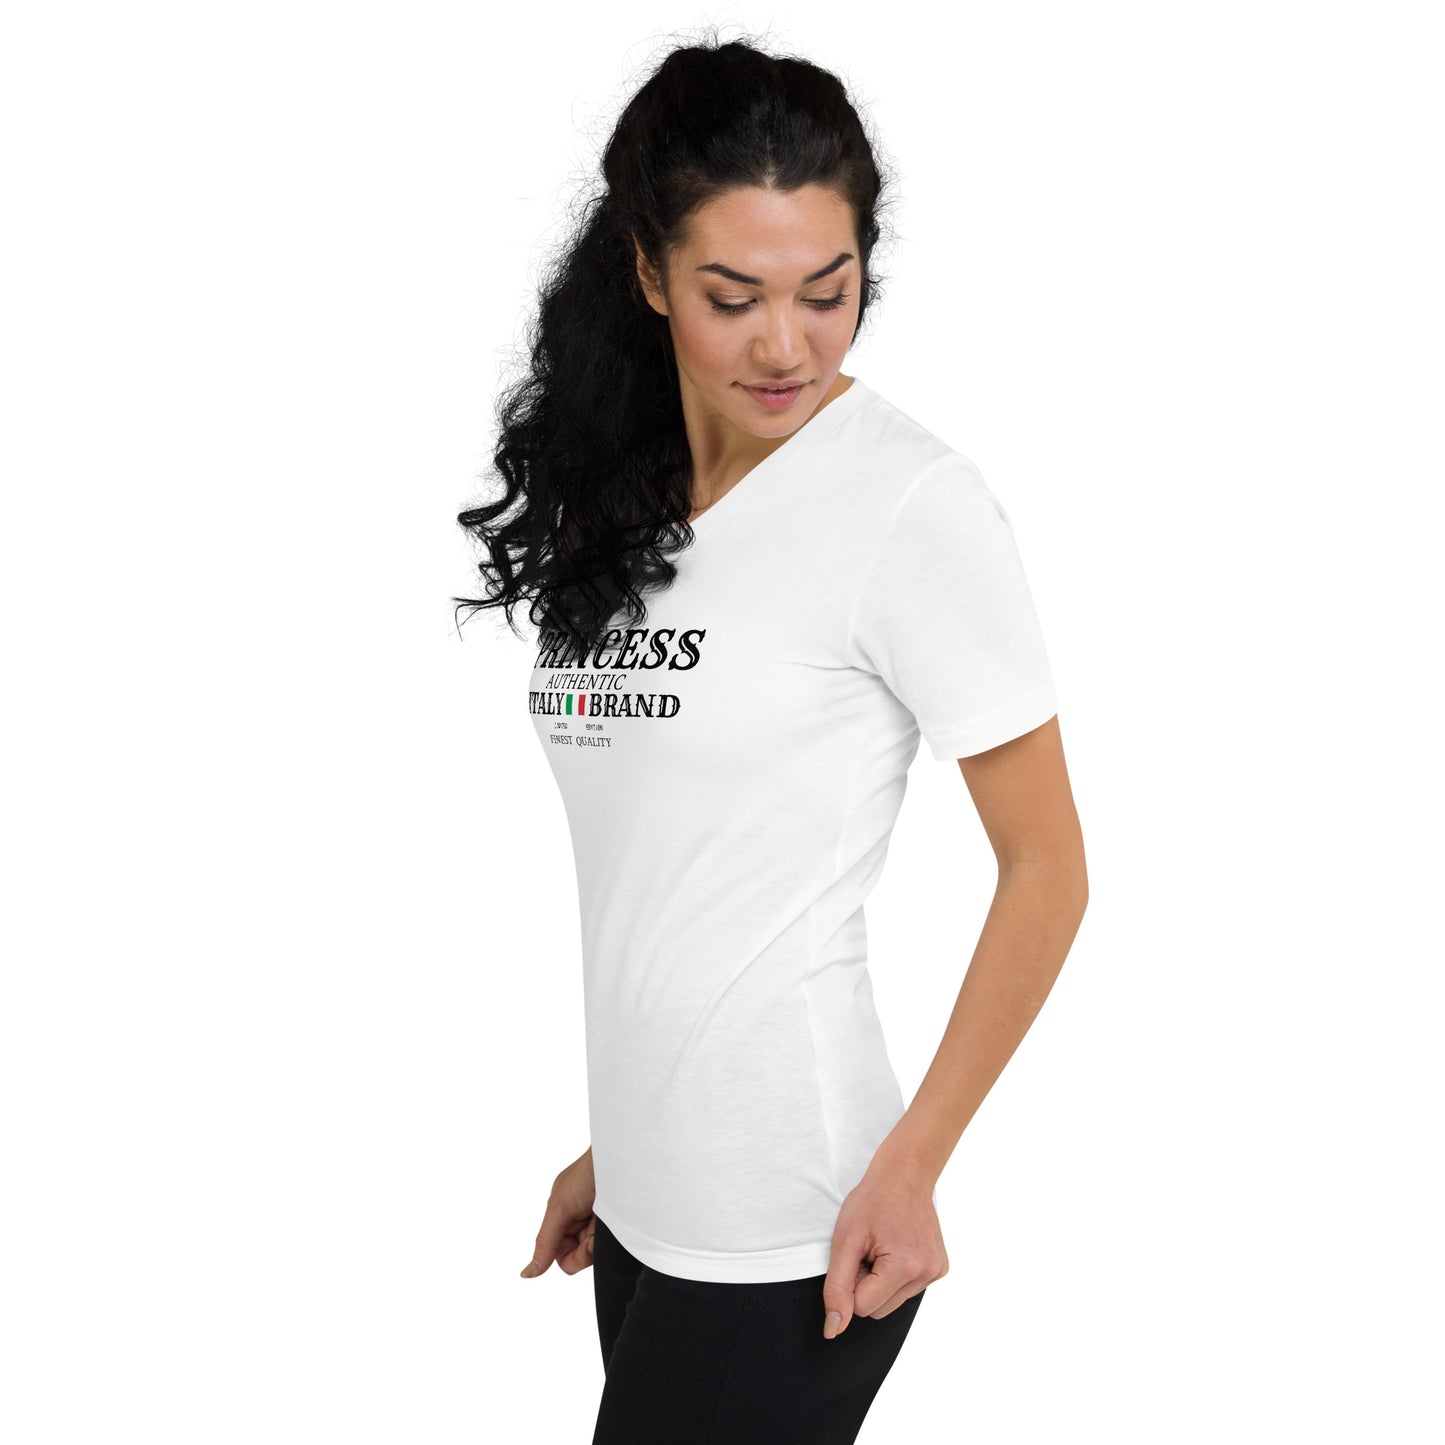 Authentic Italy Princess Brand Limited Edition Tee - On the Go with Princess O